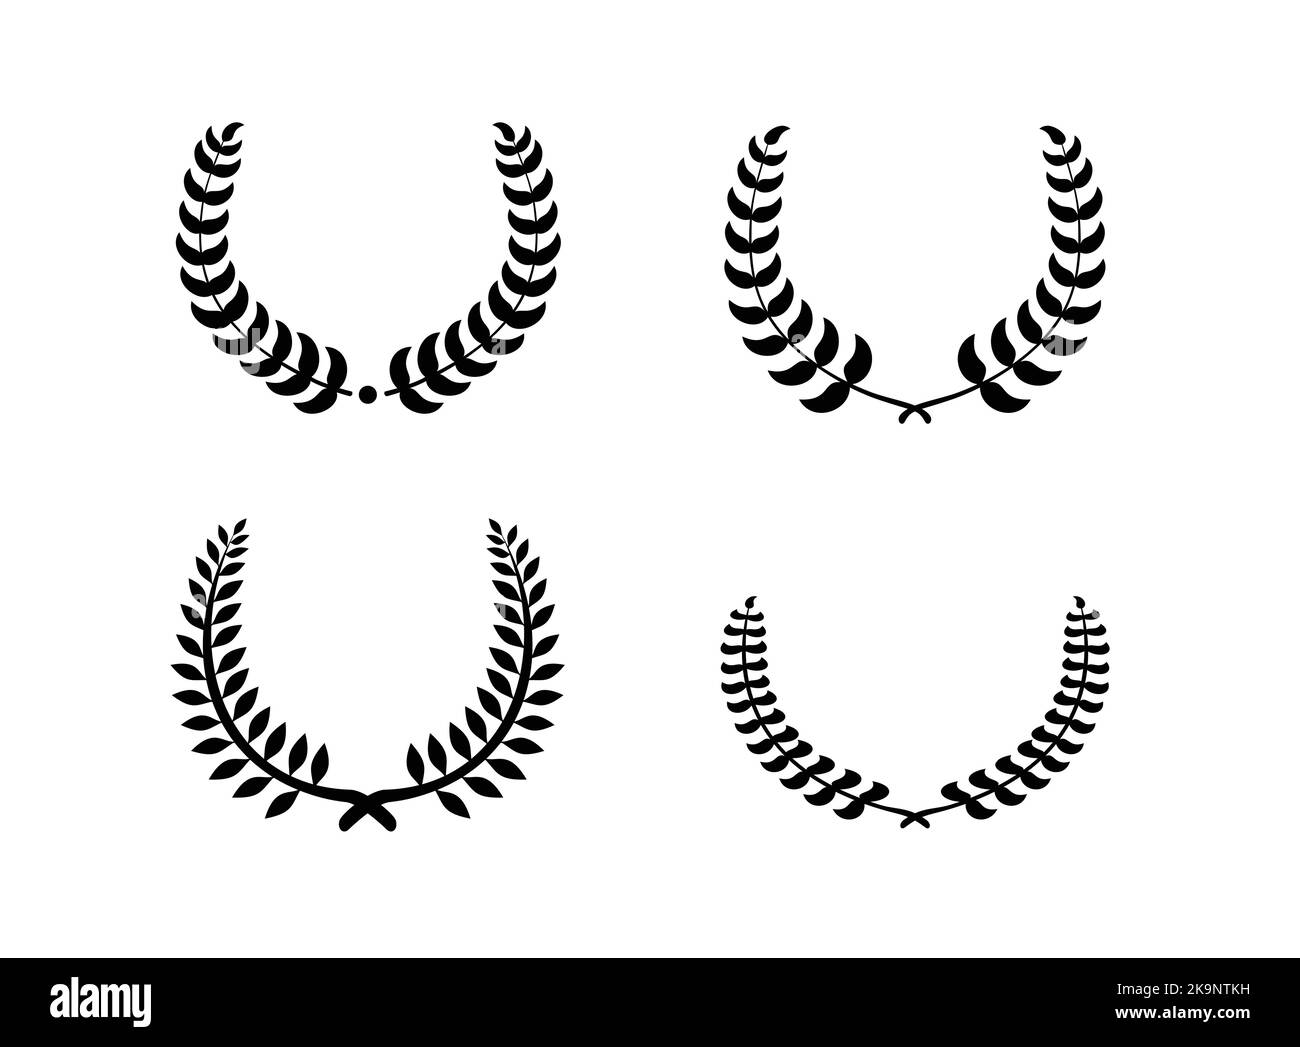 Set of retro vintage laurel wreaths icons and emblems, badges and signs for logotype or other graphic or printing awards and symbols. Stock Vector